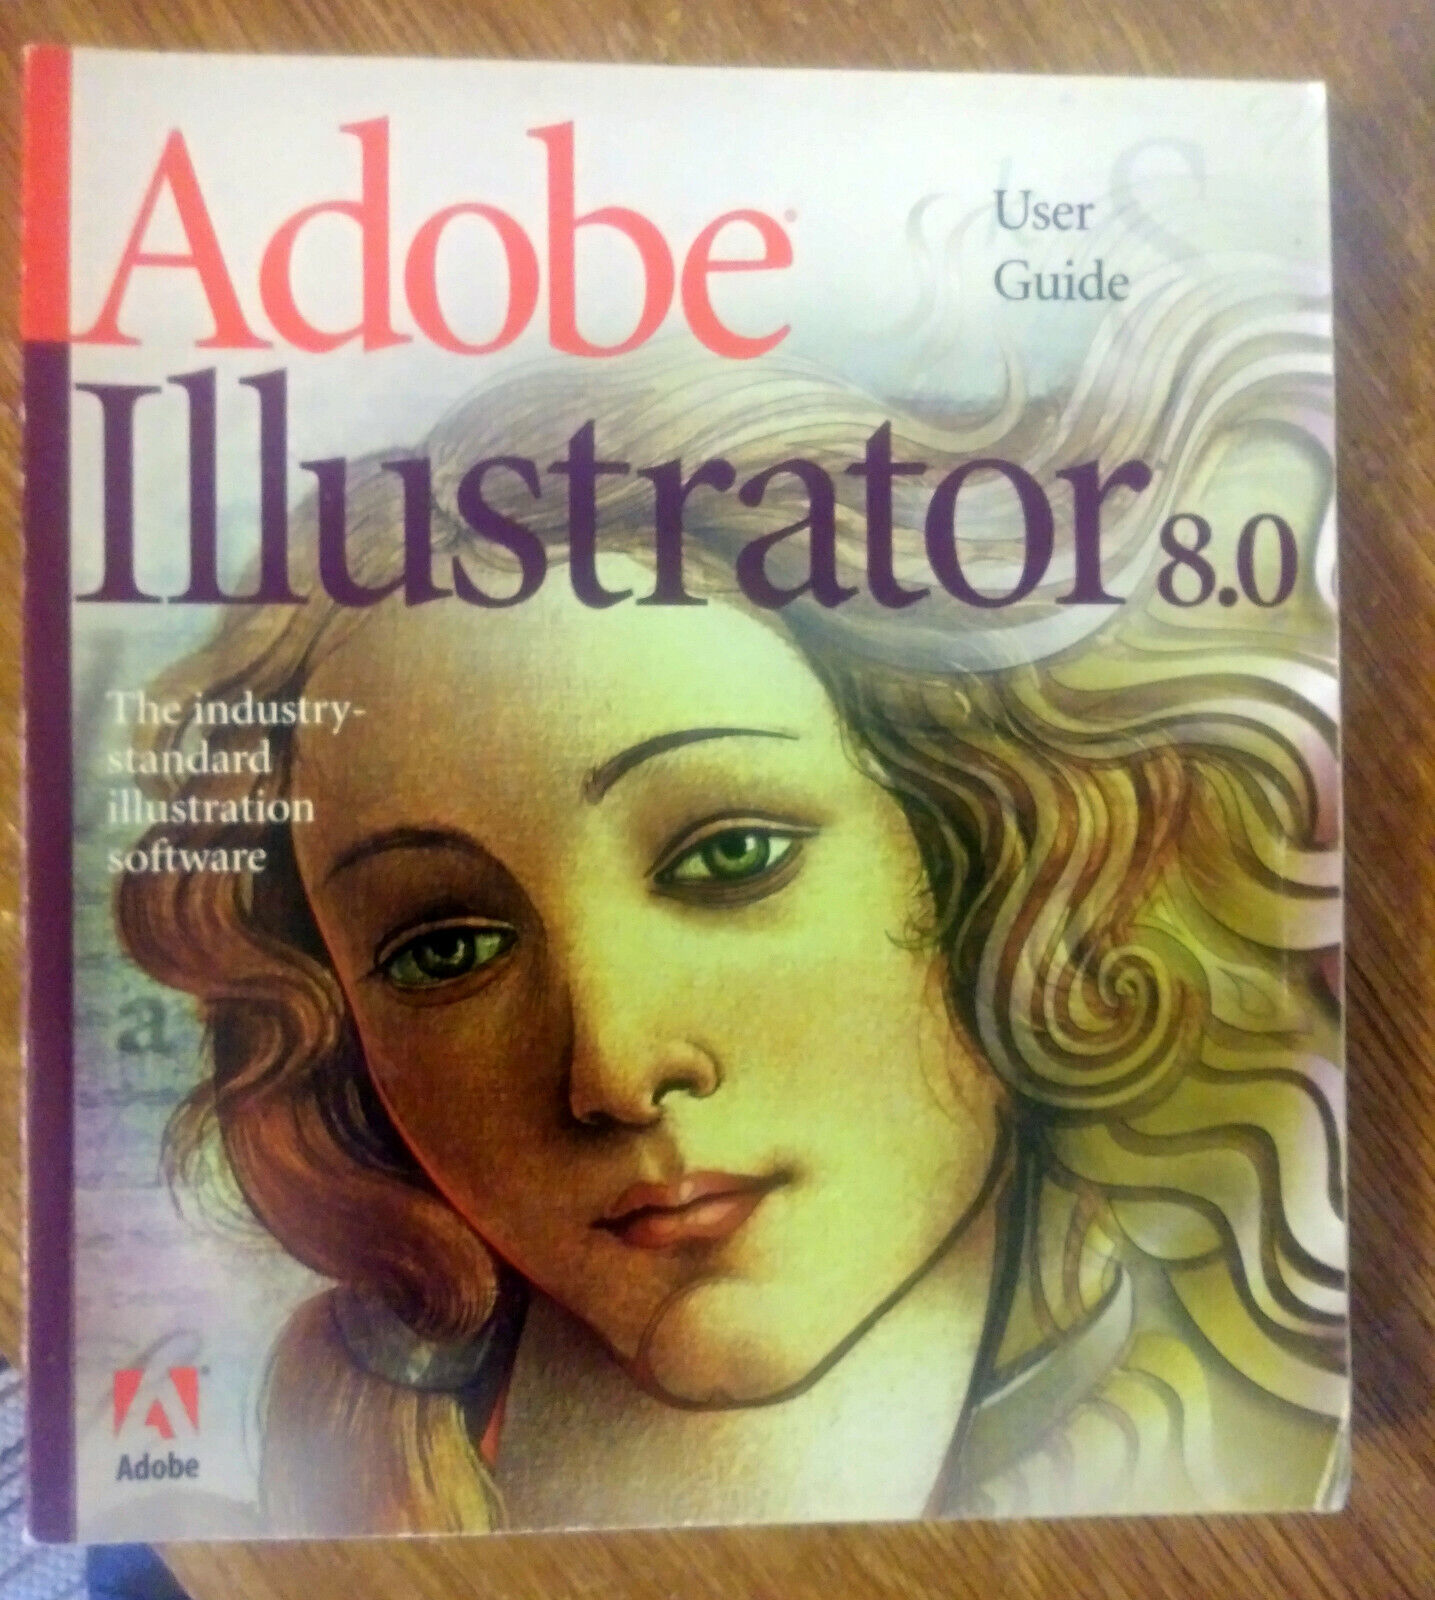 Adobe Illustrator 8.0 User Guide with Quick Reference Card 1998